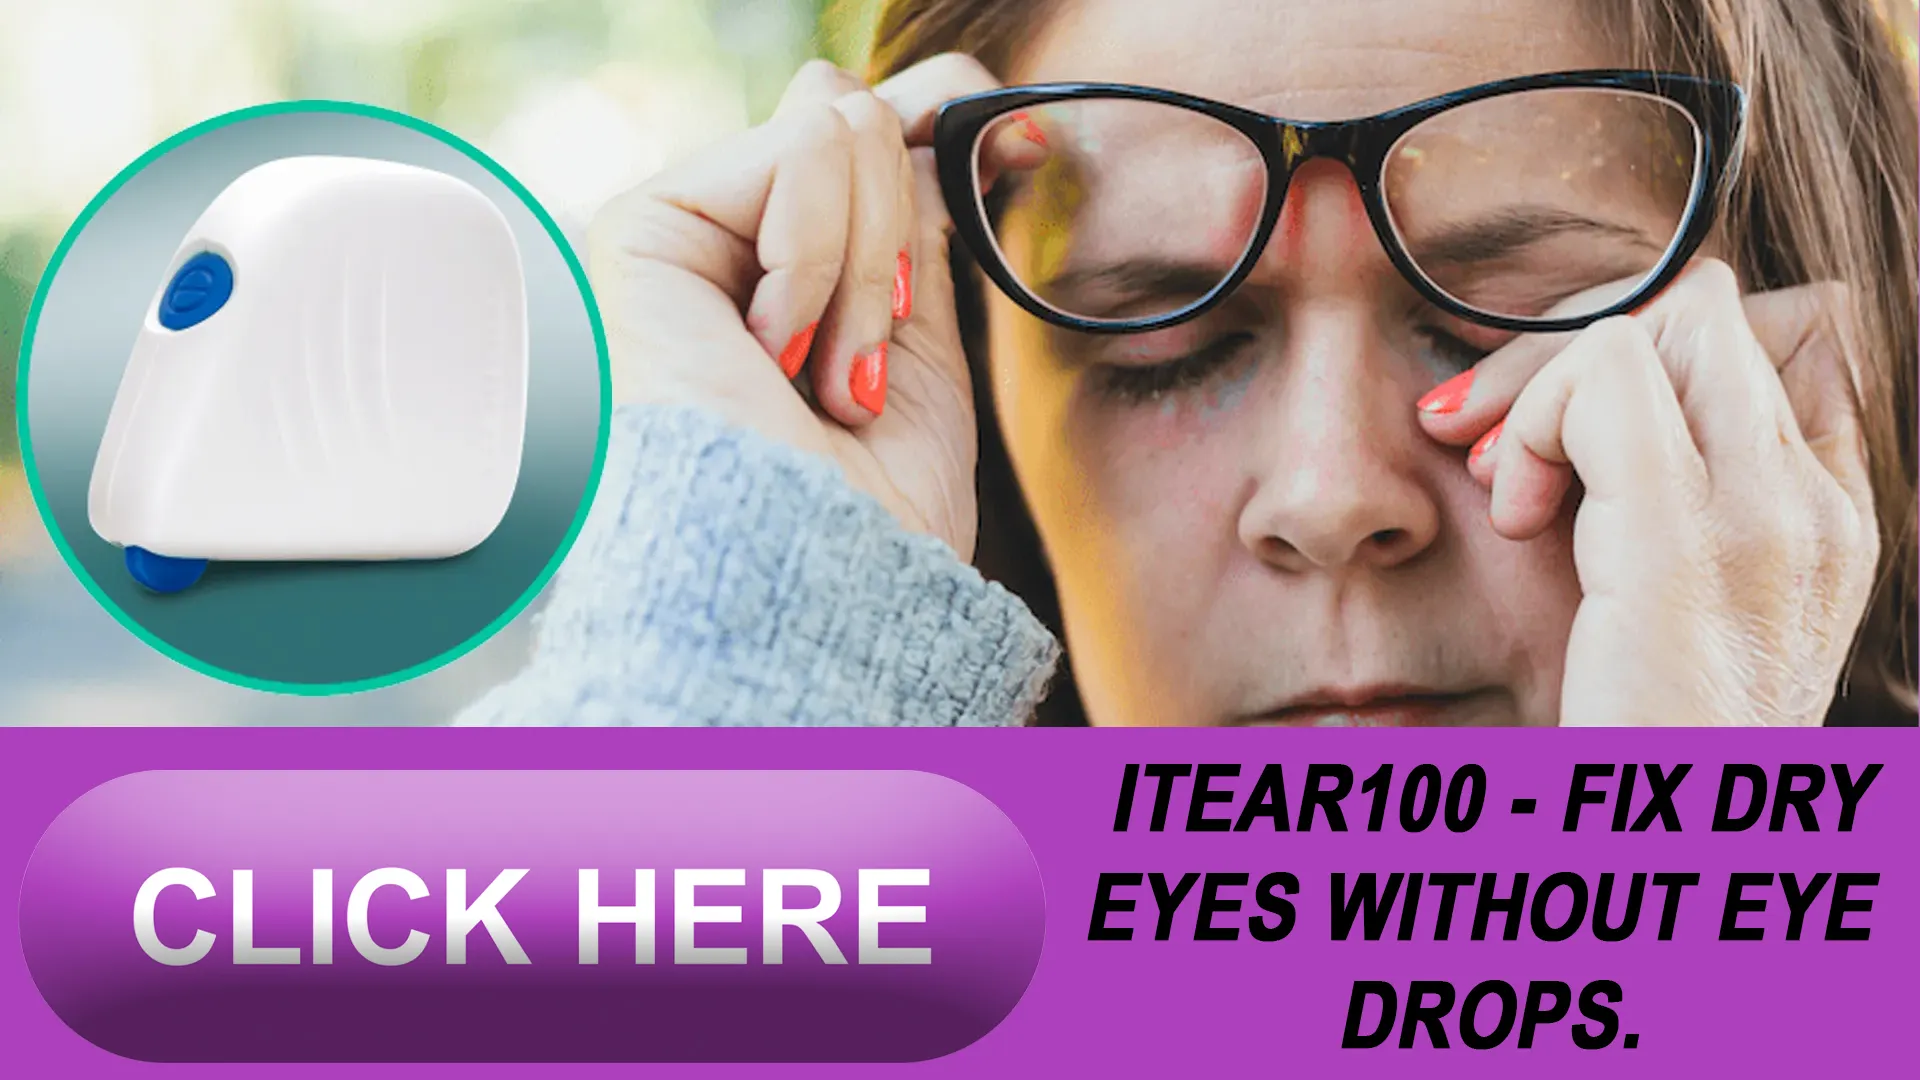 Eye Comfort Throughout Your Day: The iTEAR100 Routine